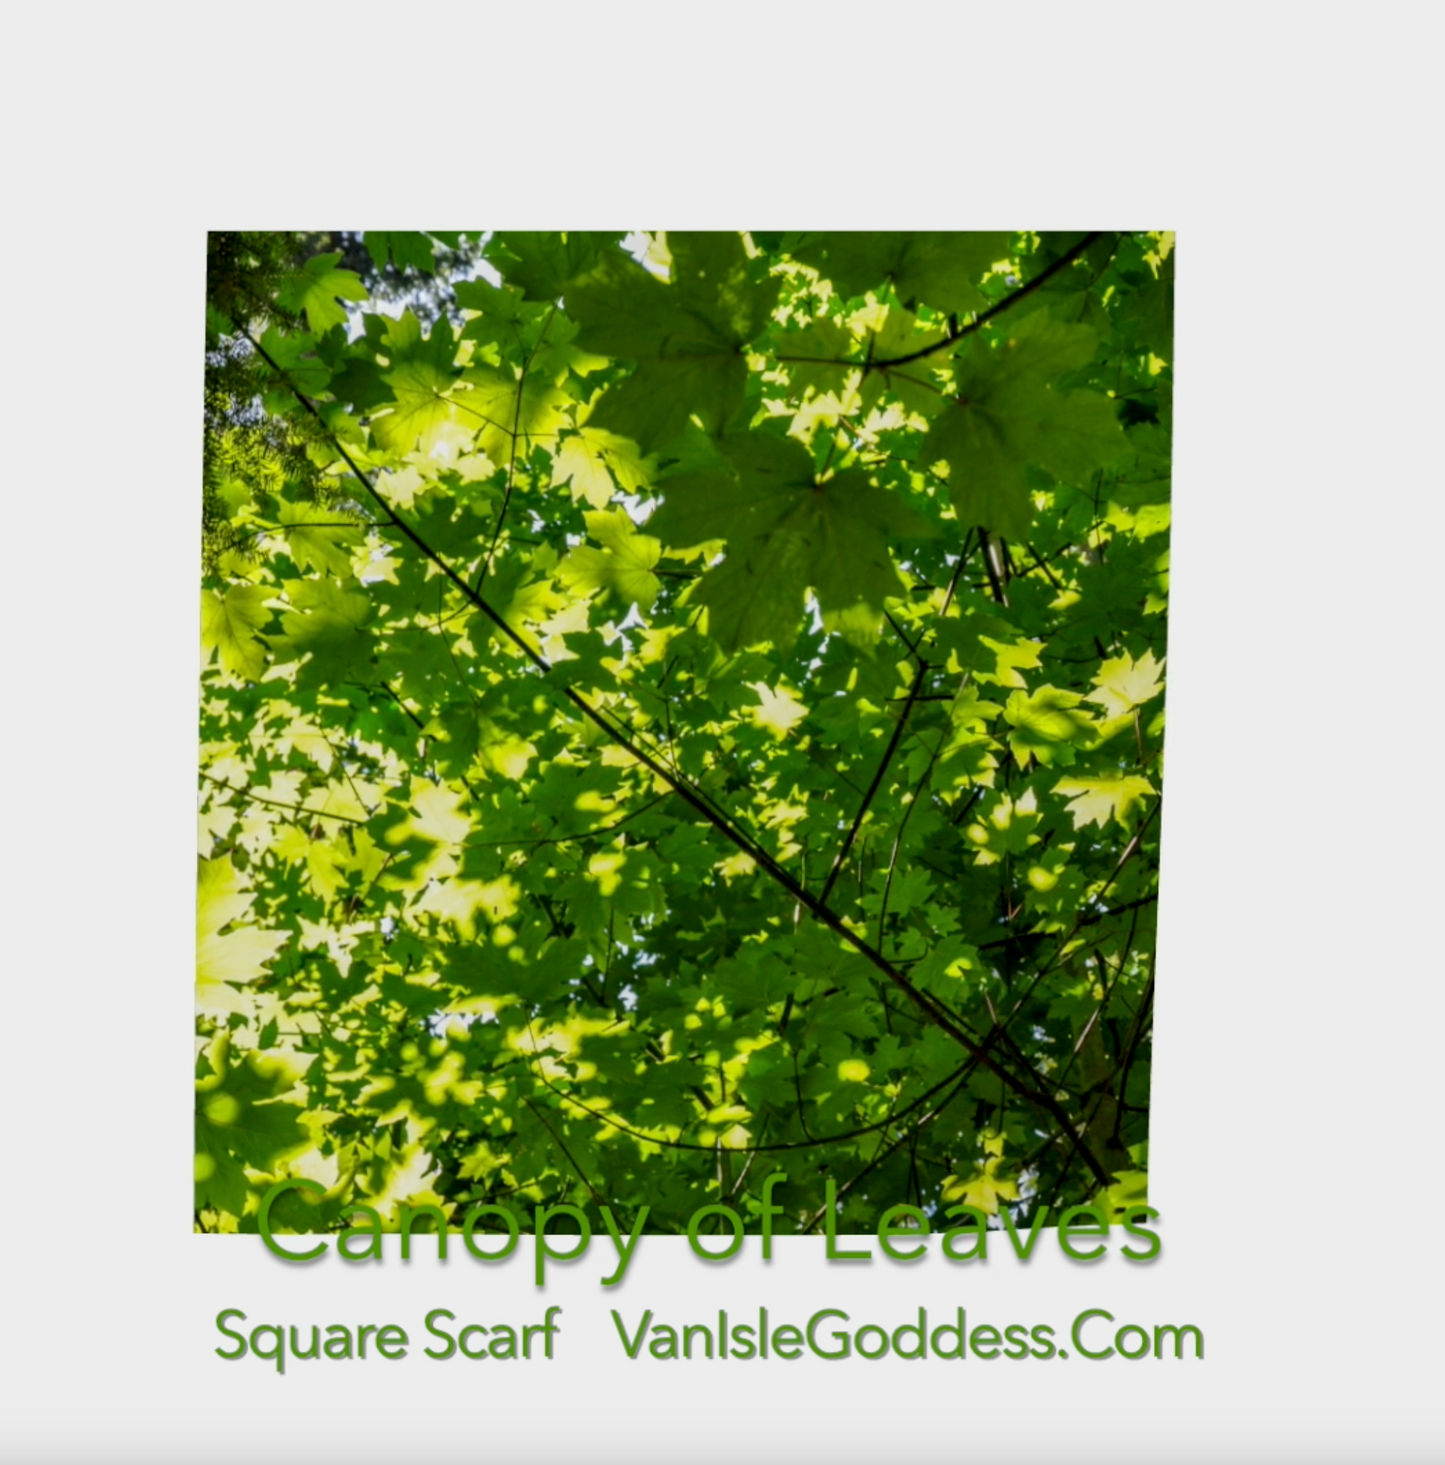 Canopy of Leaves square scarf shown .